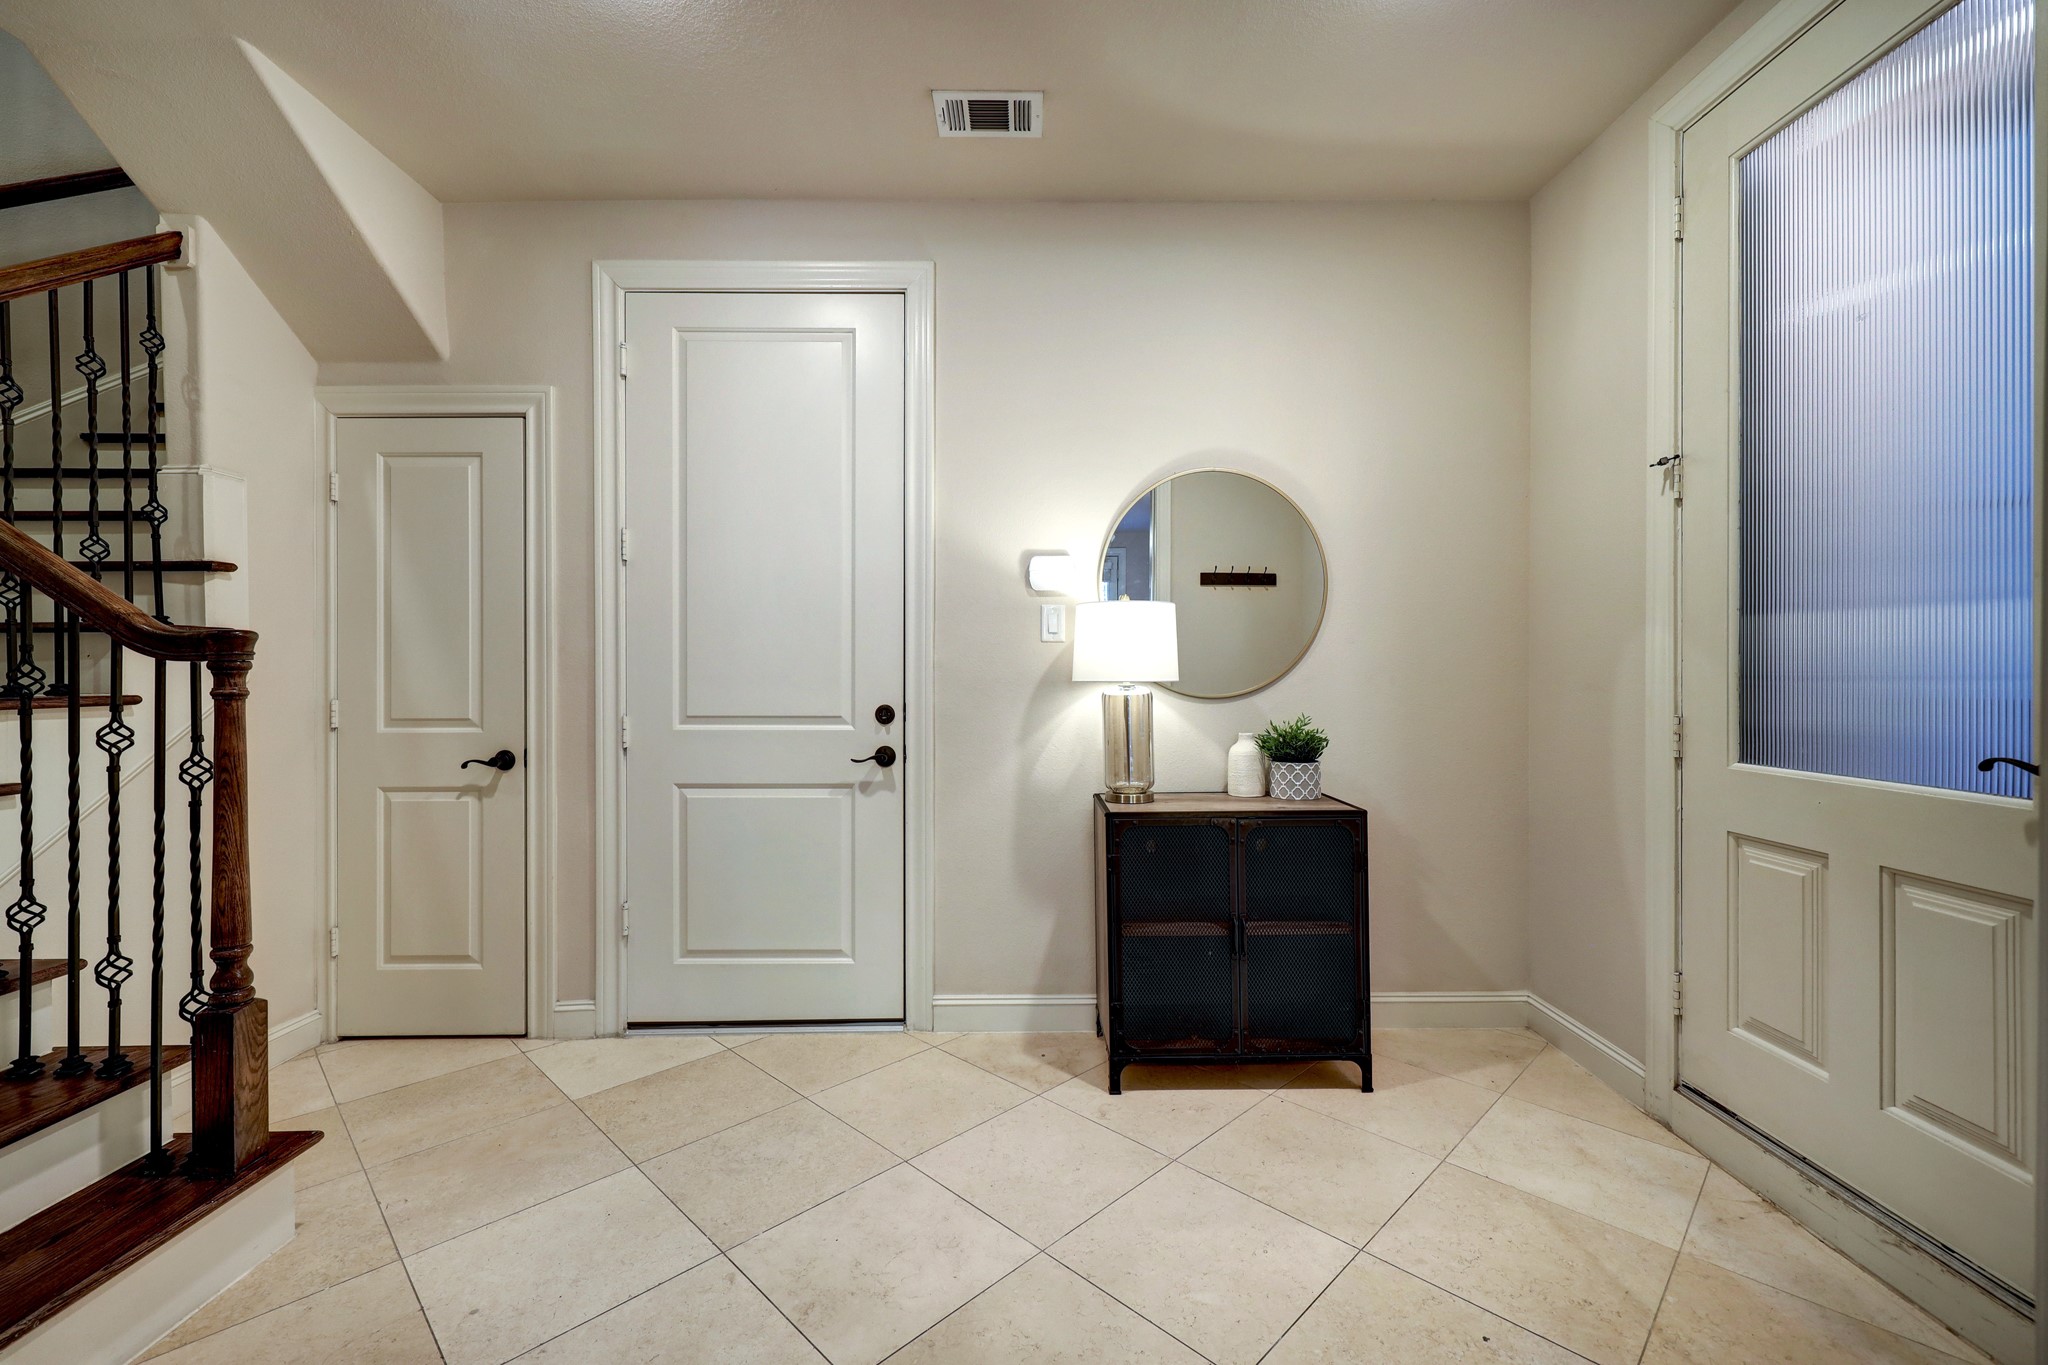 This welcoming entryway offers lovely travertine floors, a large storage closet, convenient garage access, and access to beautiful bedroom with private deck.